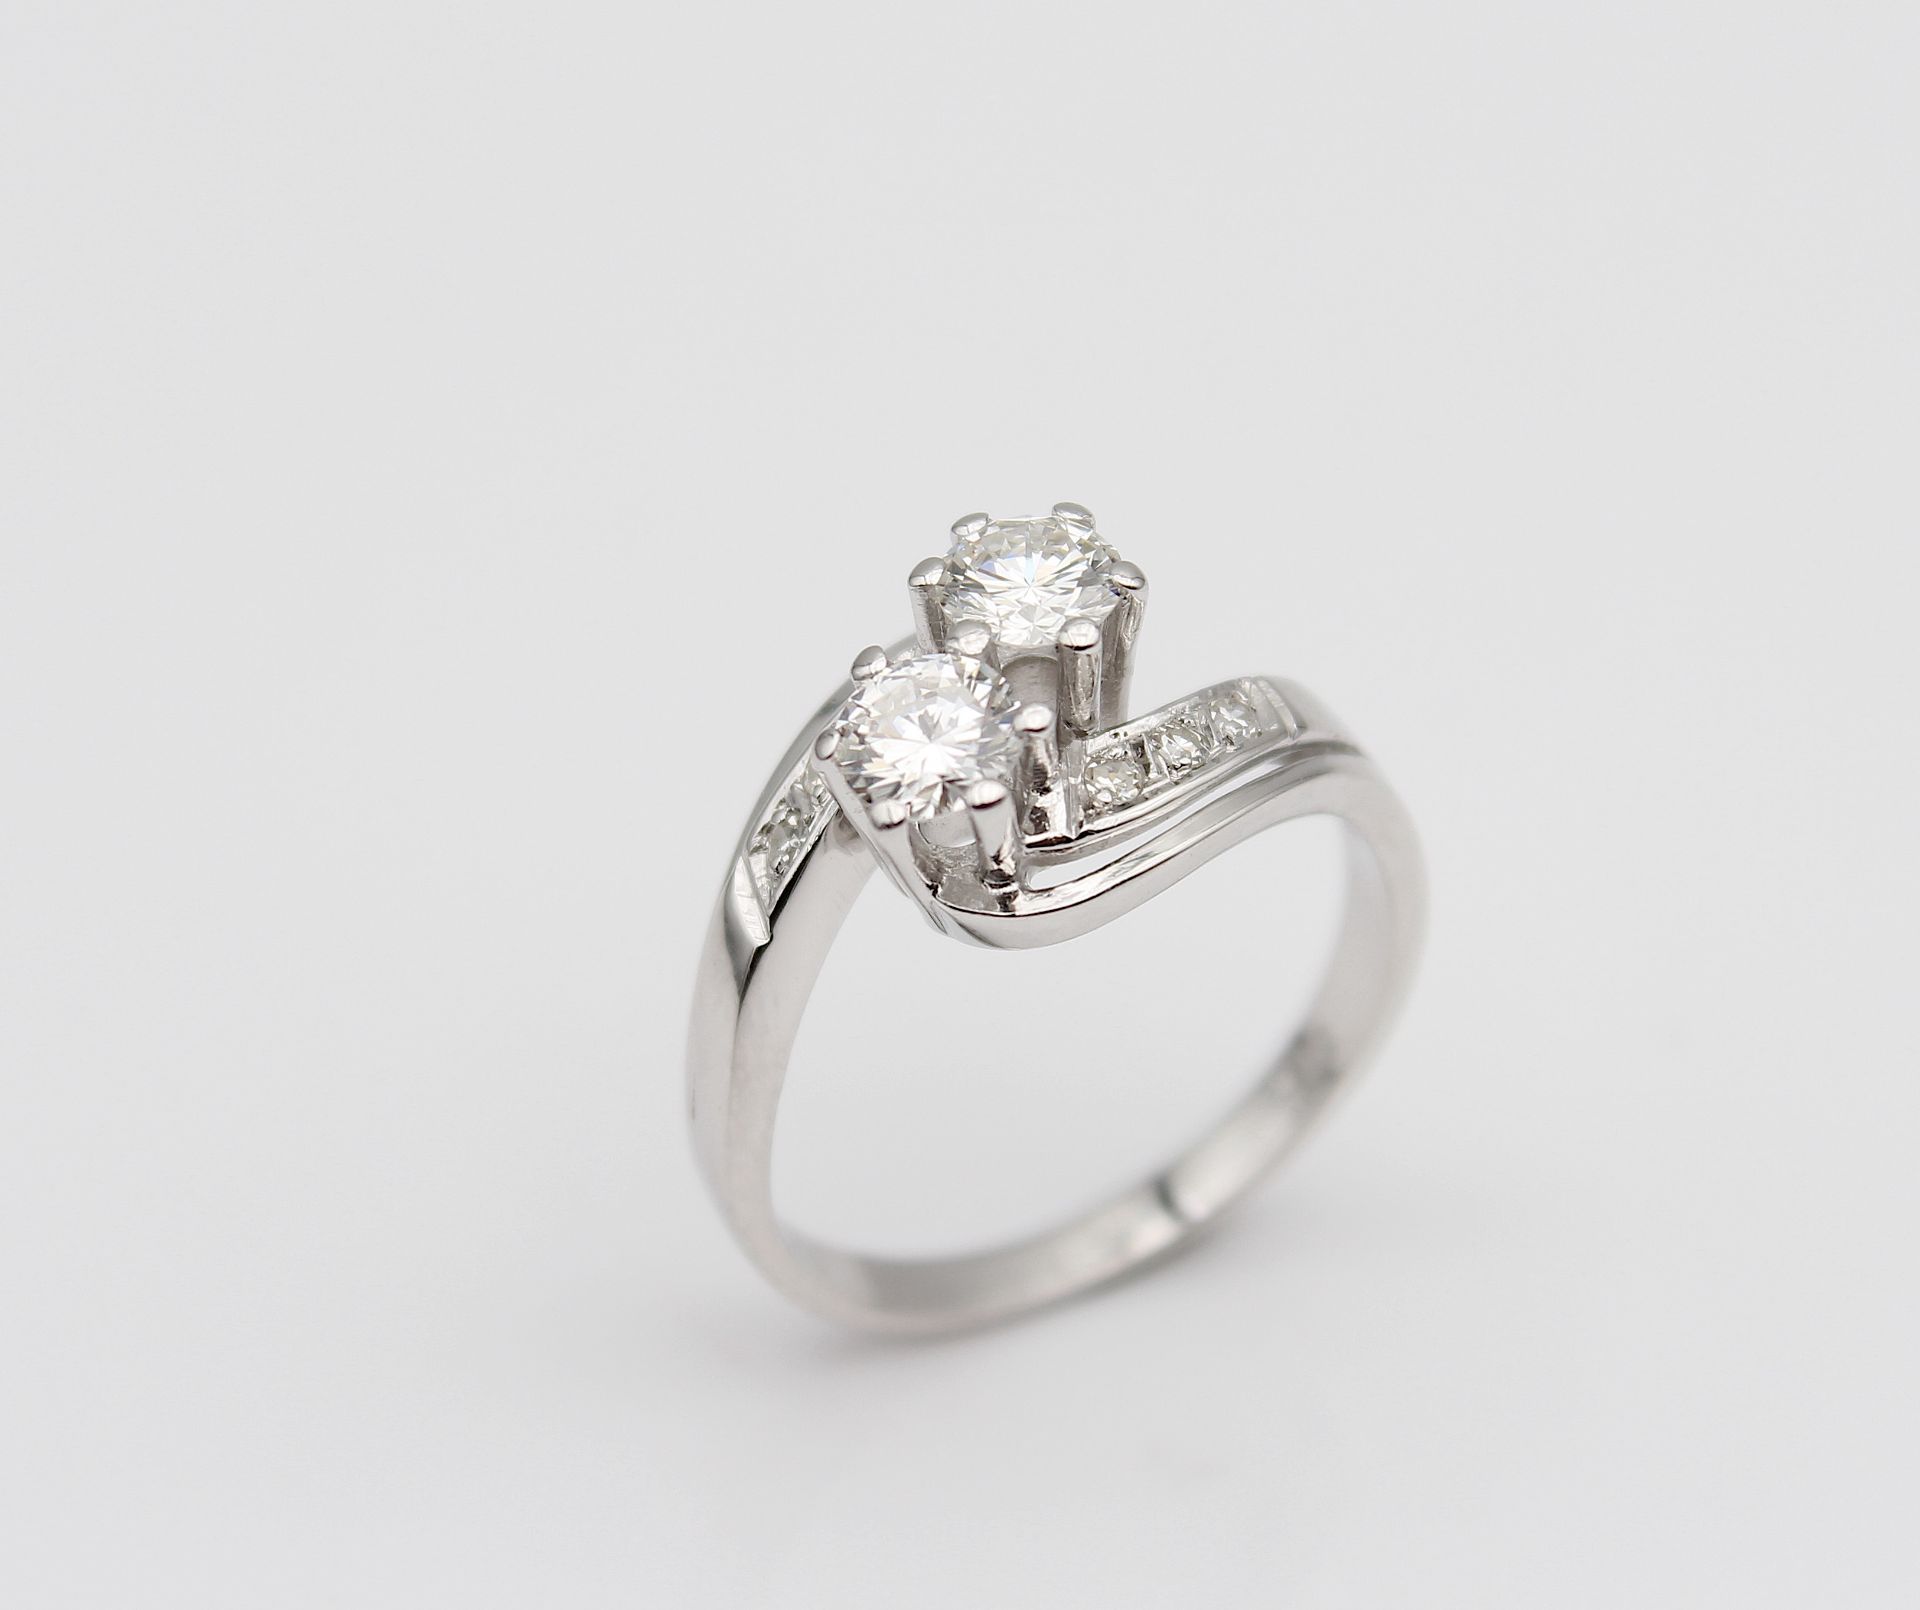 High quality ring with brilliants and diamonds - Image 5 of 5